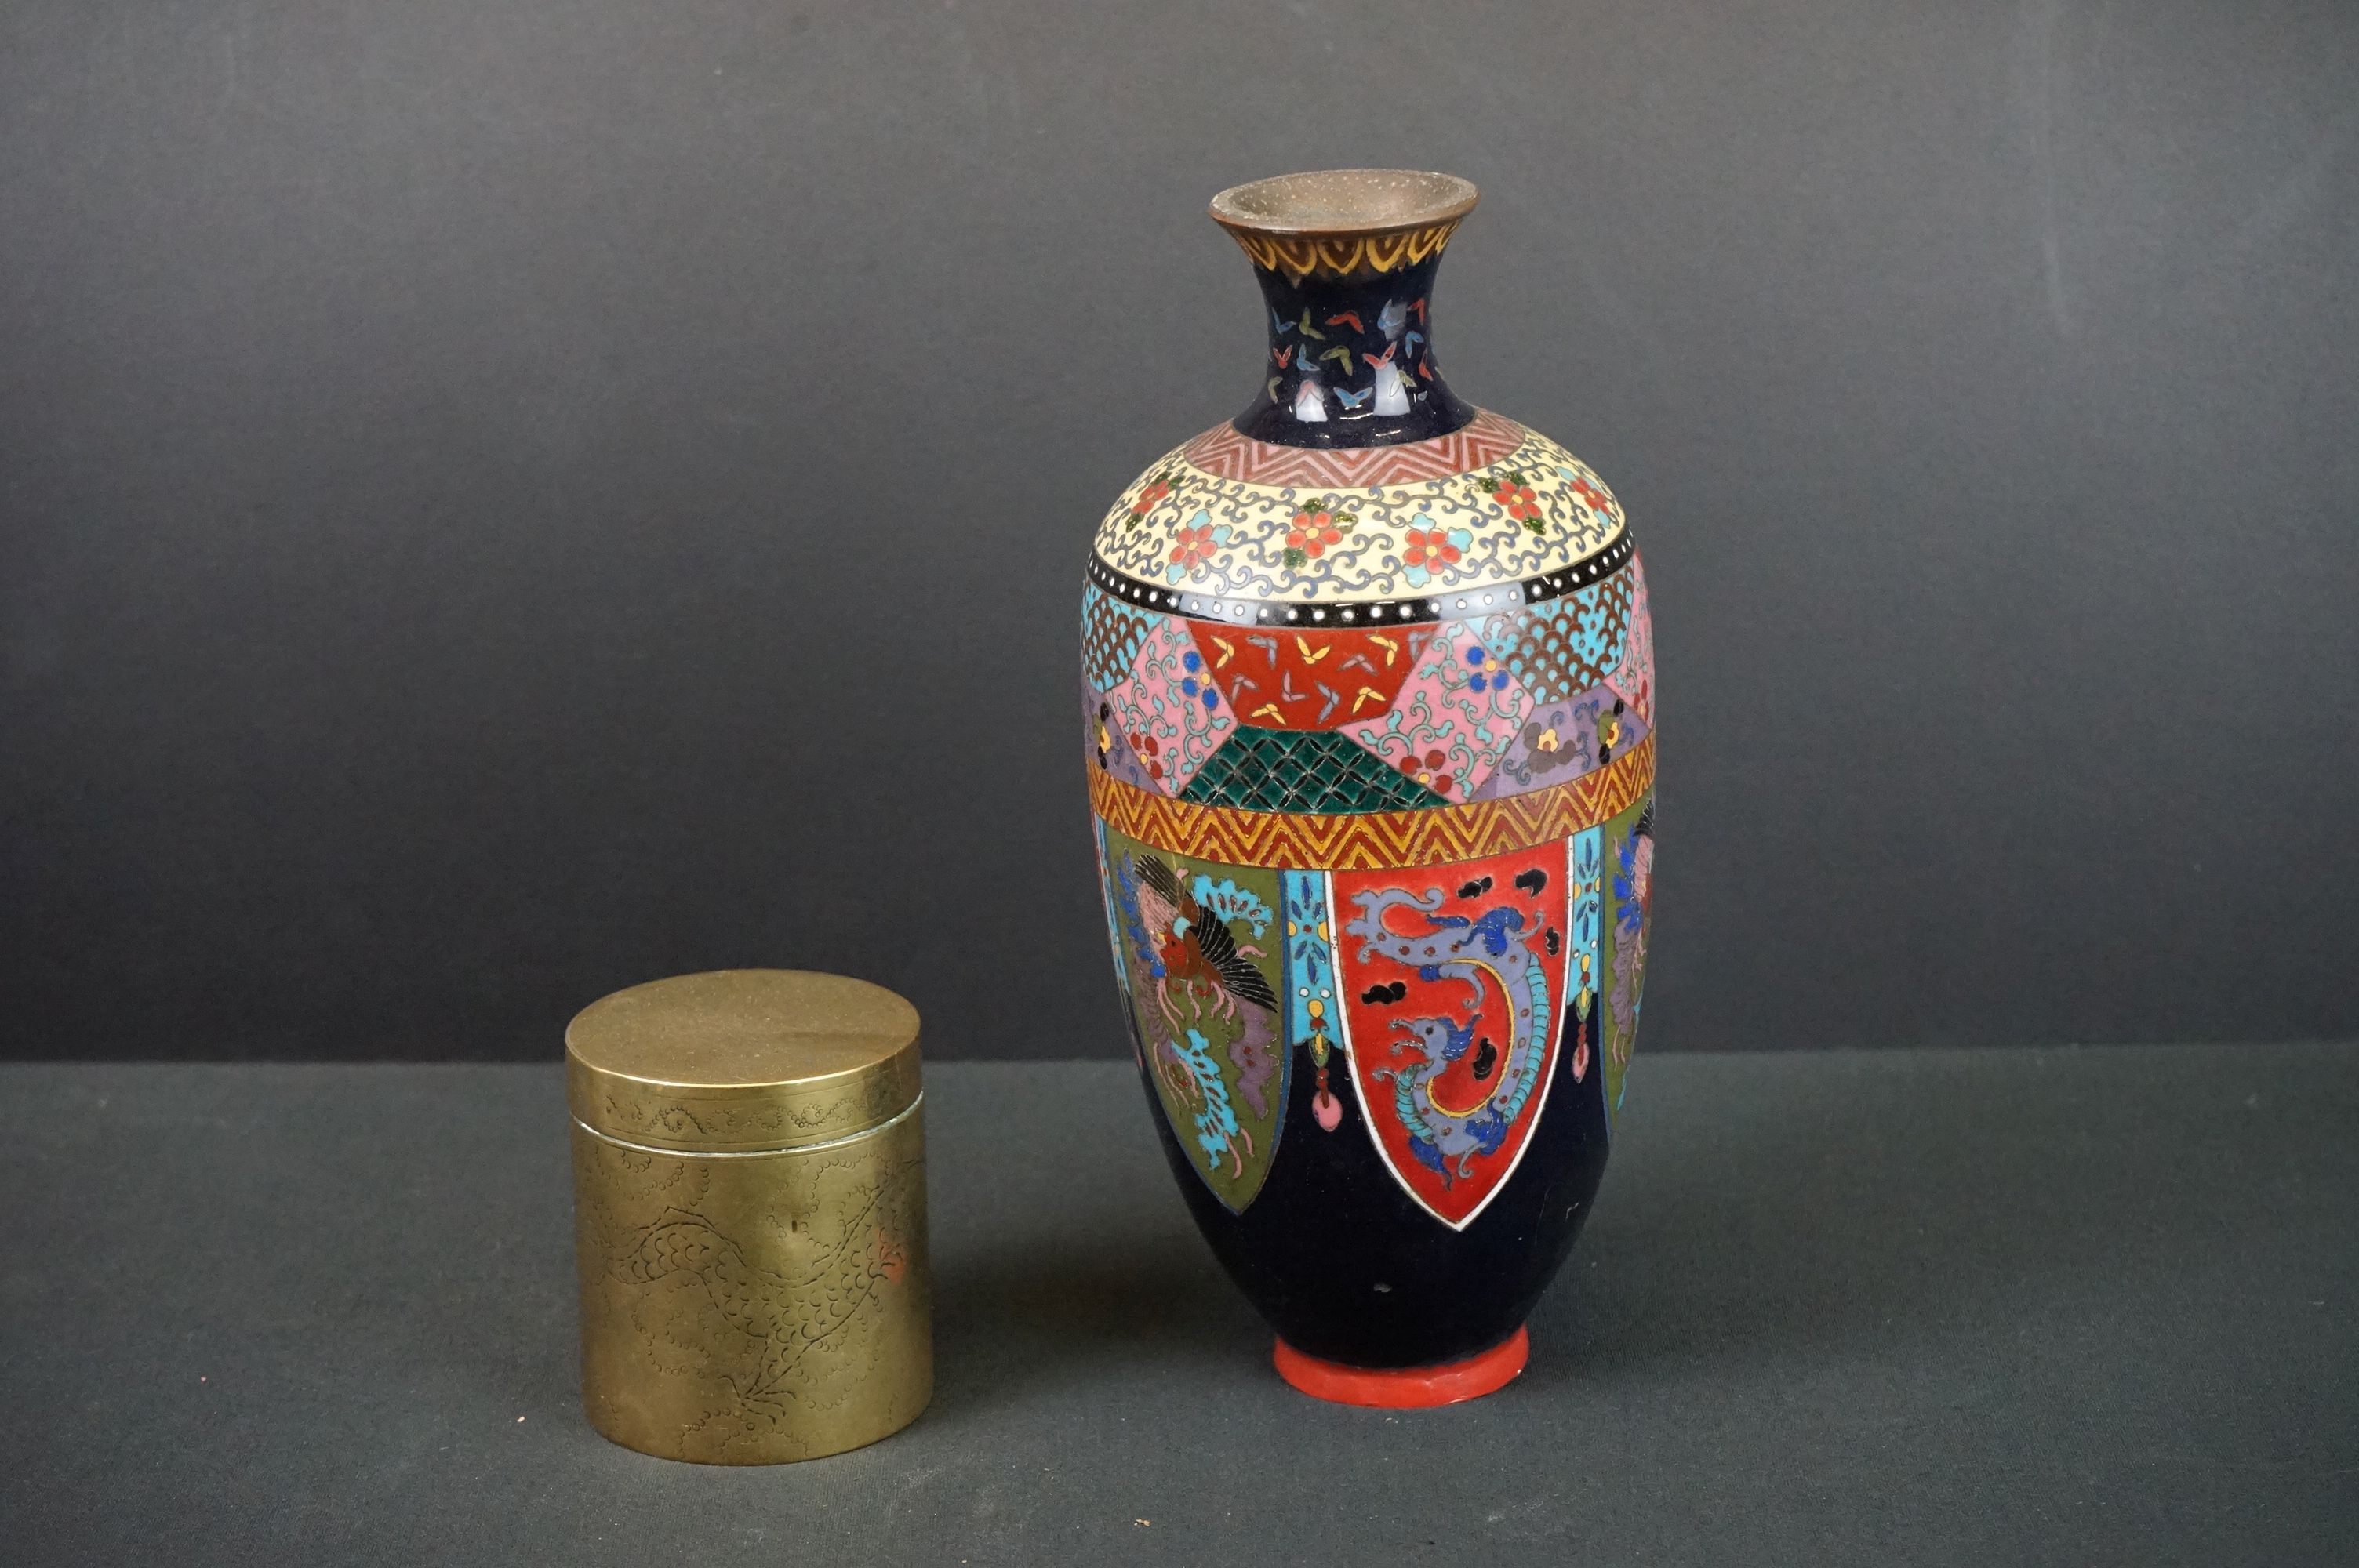 Japanese Cloisonne Baluster Vase 24cm high together with a Chinese Brass Lidded Jar engraved with